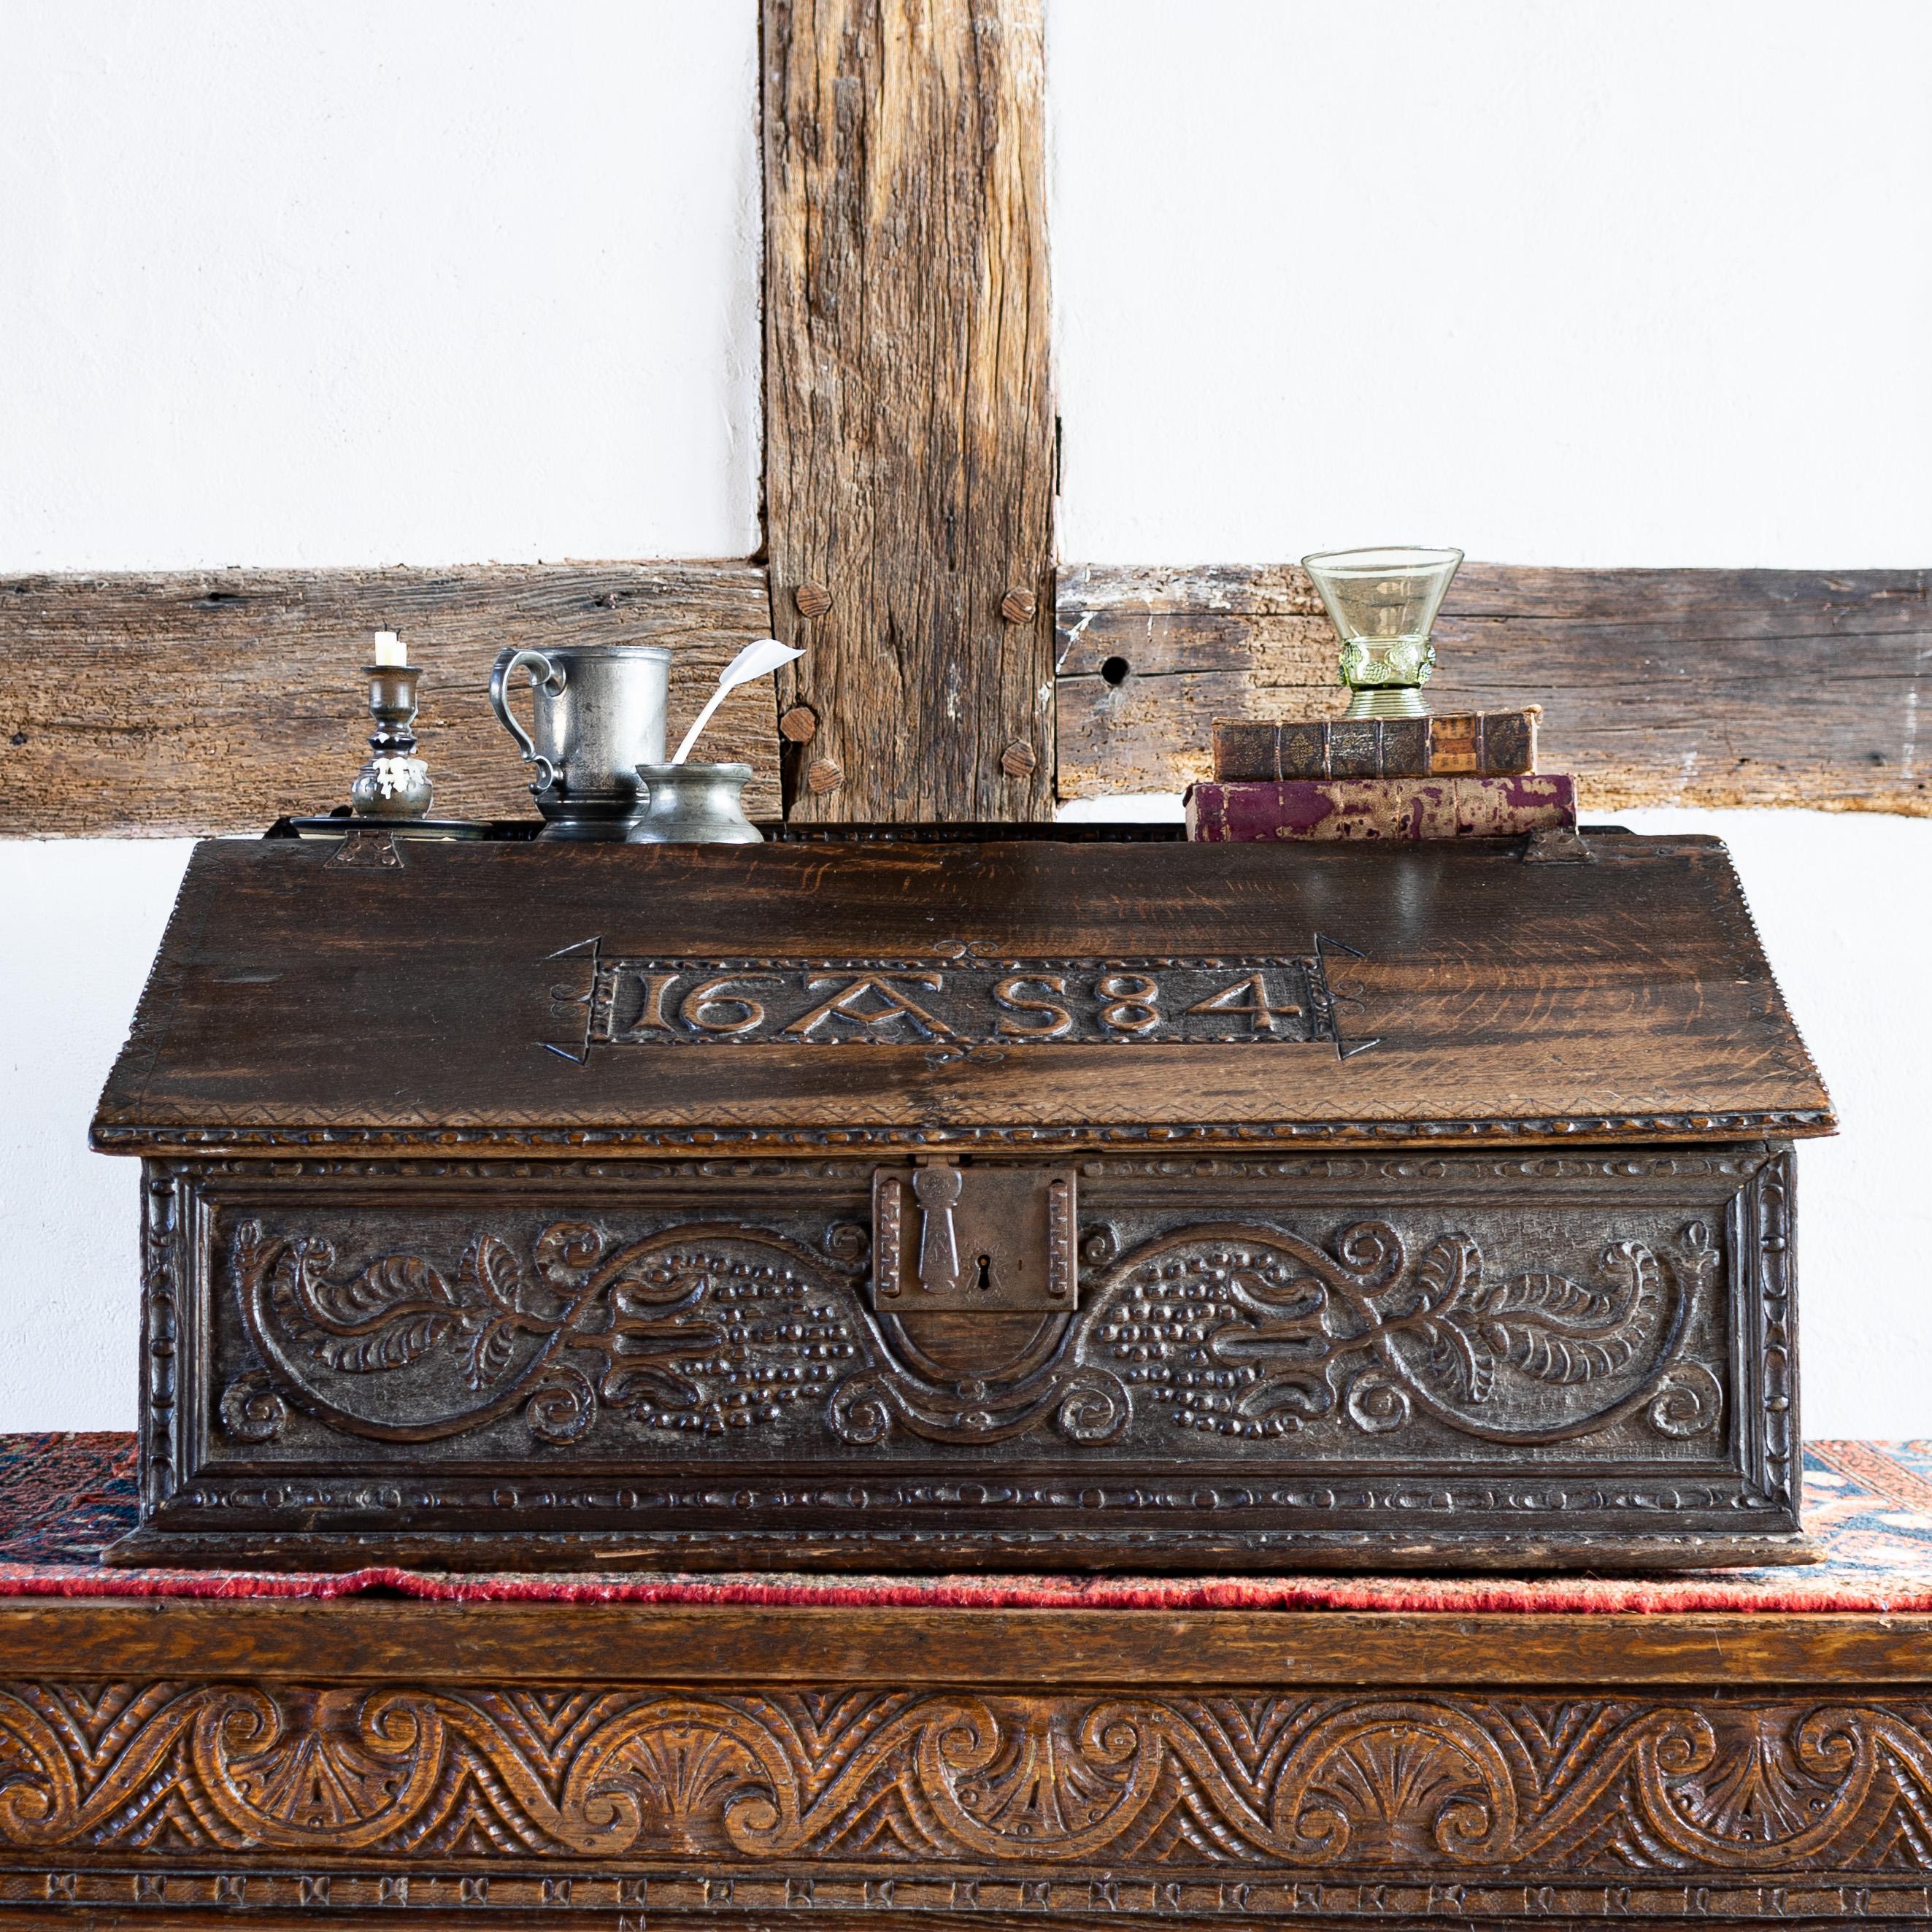 Charles II carved oak desk box of large proportions, the front carved with trailing vine & grape decoration, the lid carved with date and initials 16 AS 84, revealing three carved internal draws.